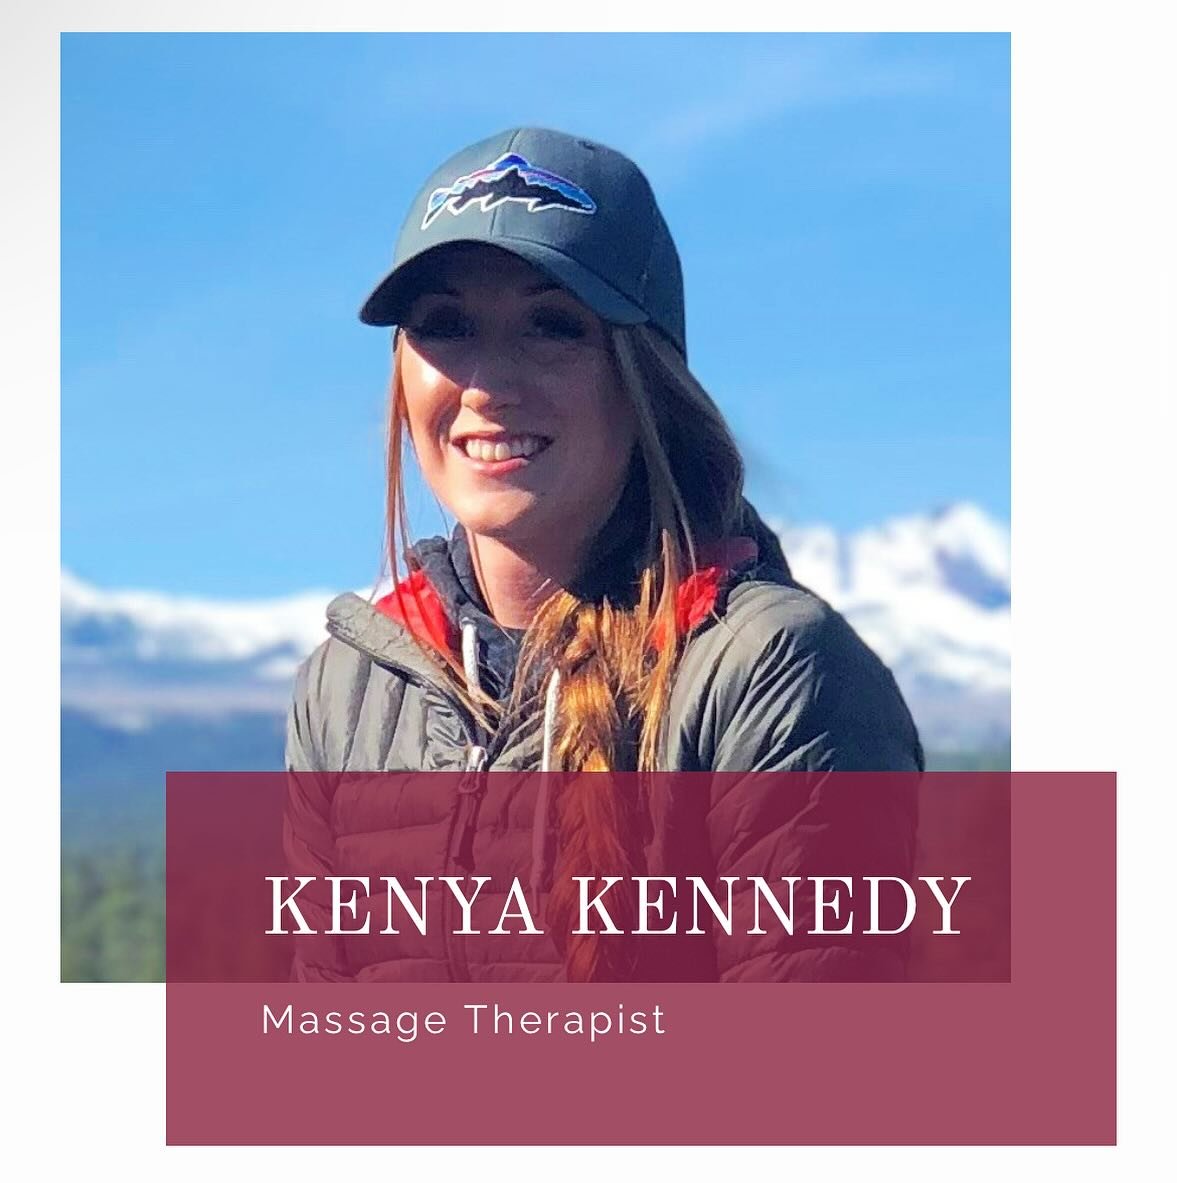 We are blessed to have Kenya on campus! From her website&hellip;
&ldquo;To continue to work, to continue to love what you do, is certainly a contributing factor to one&rsquo;s longevity and health.&rdquo;
My goal is to provide therapeutic and restora